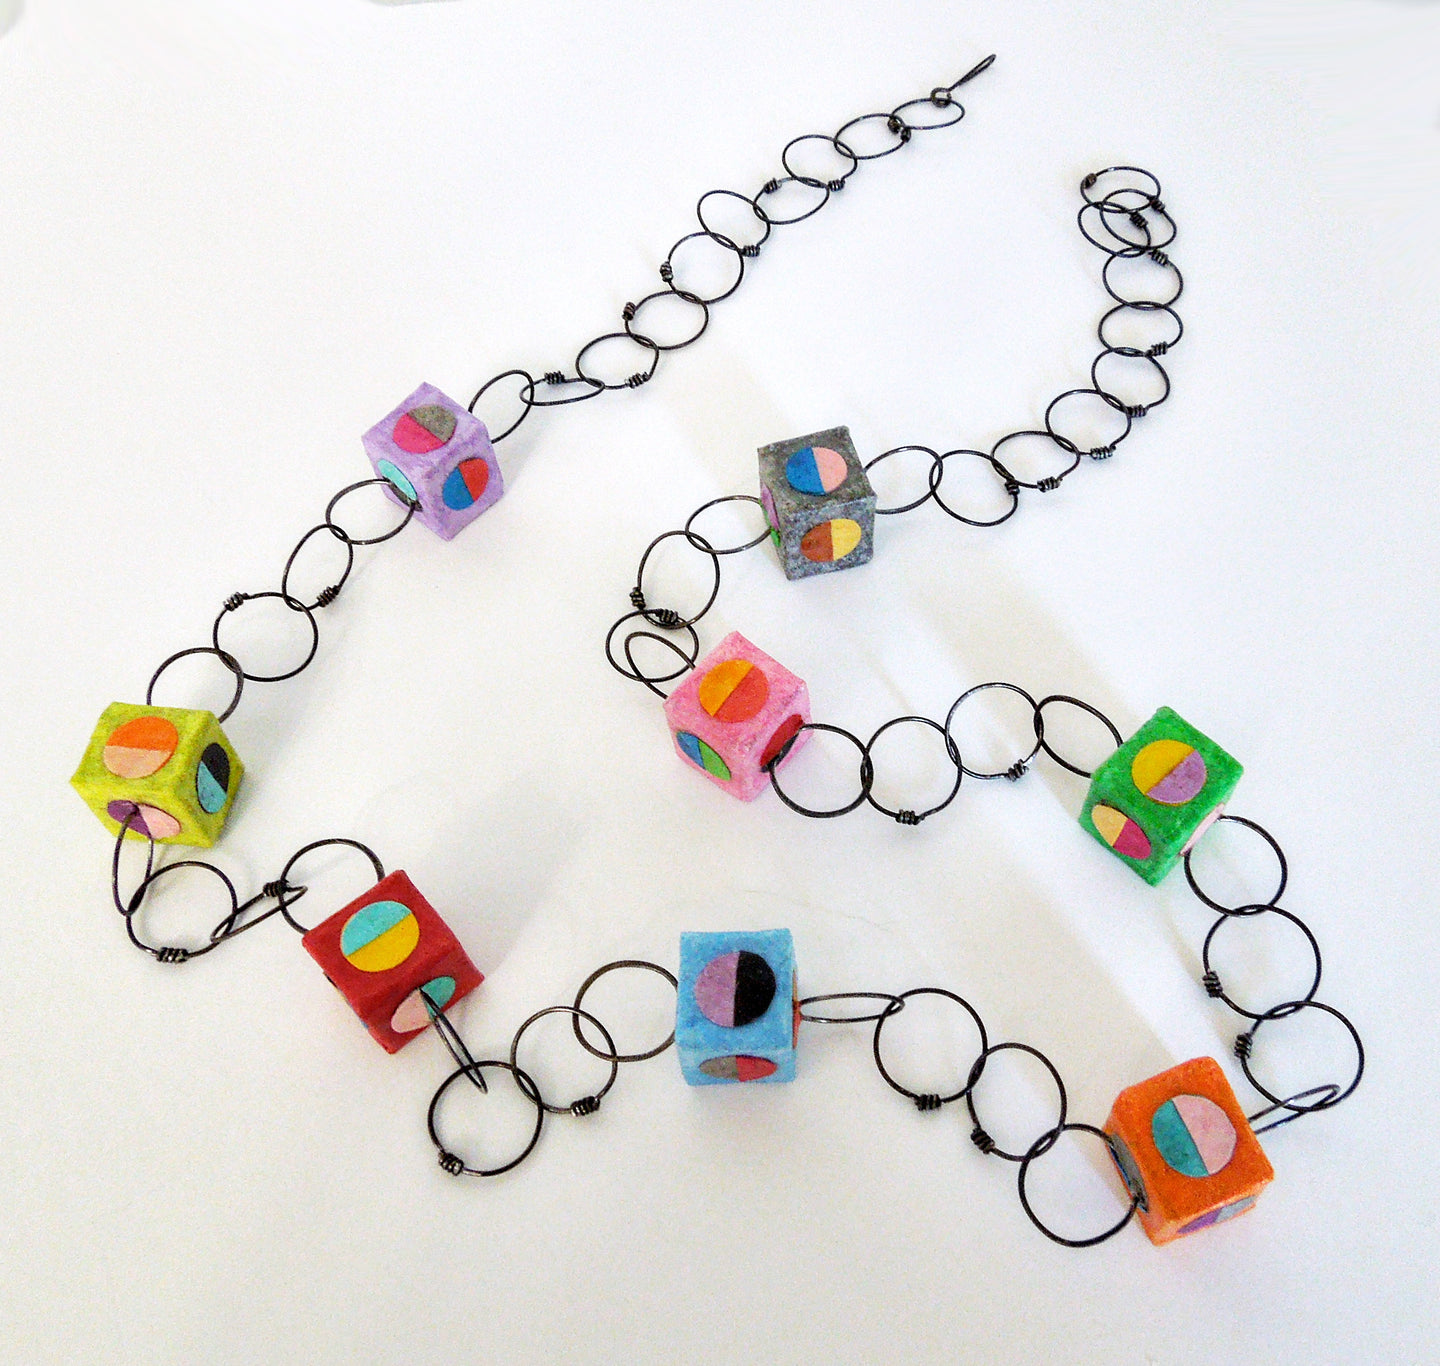 4. Color Theory Circles Necklace